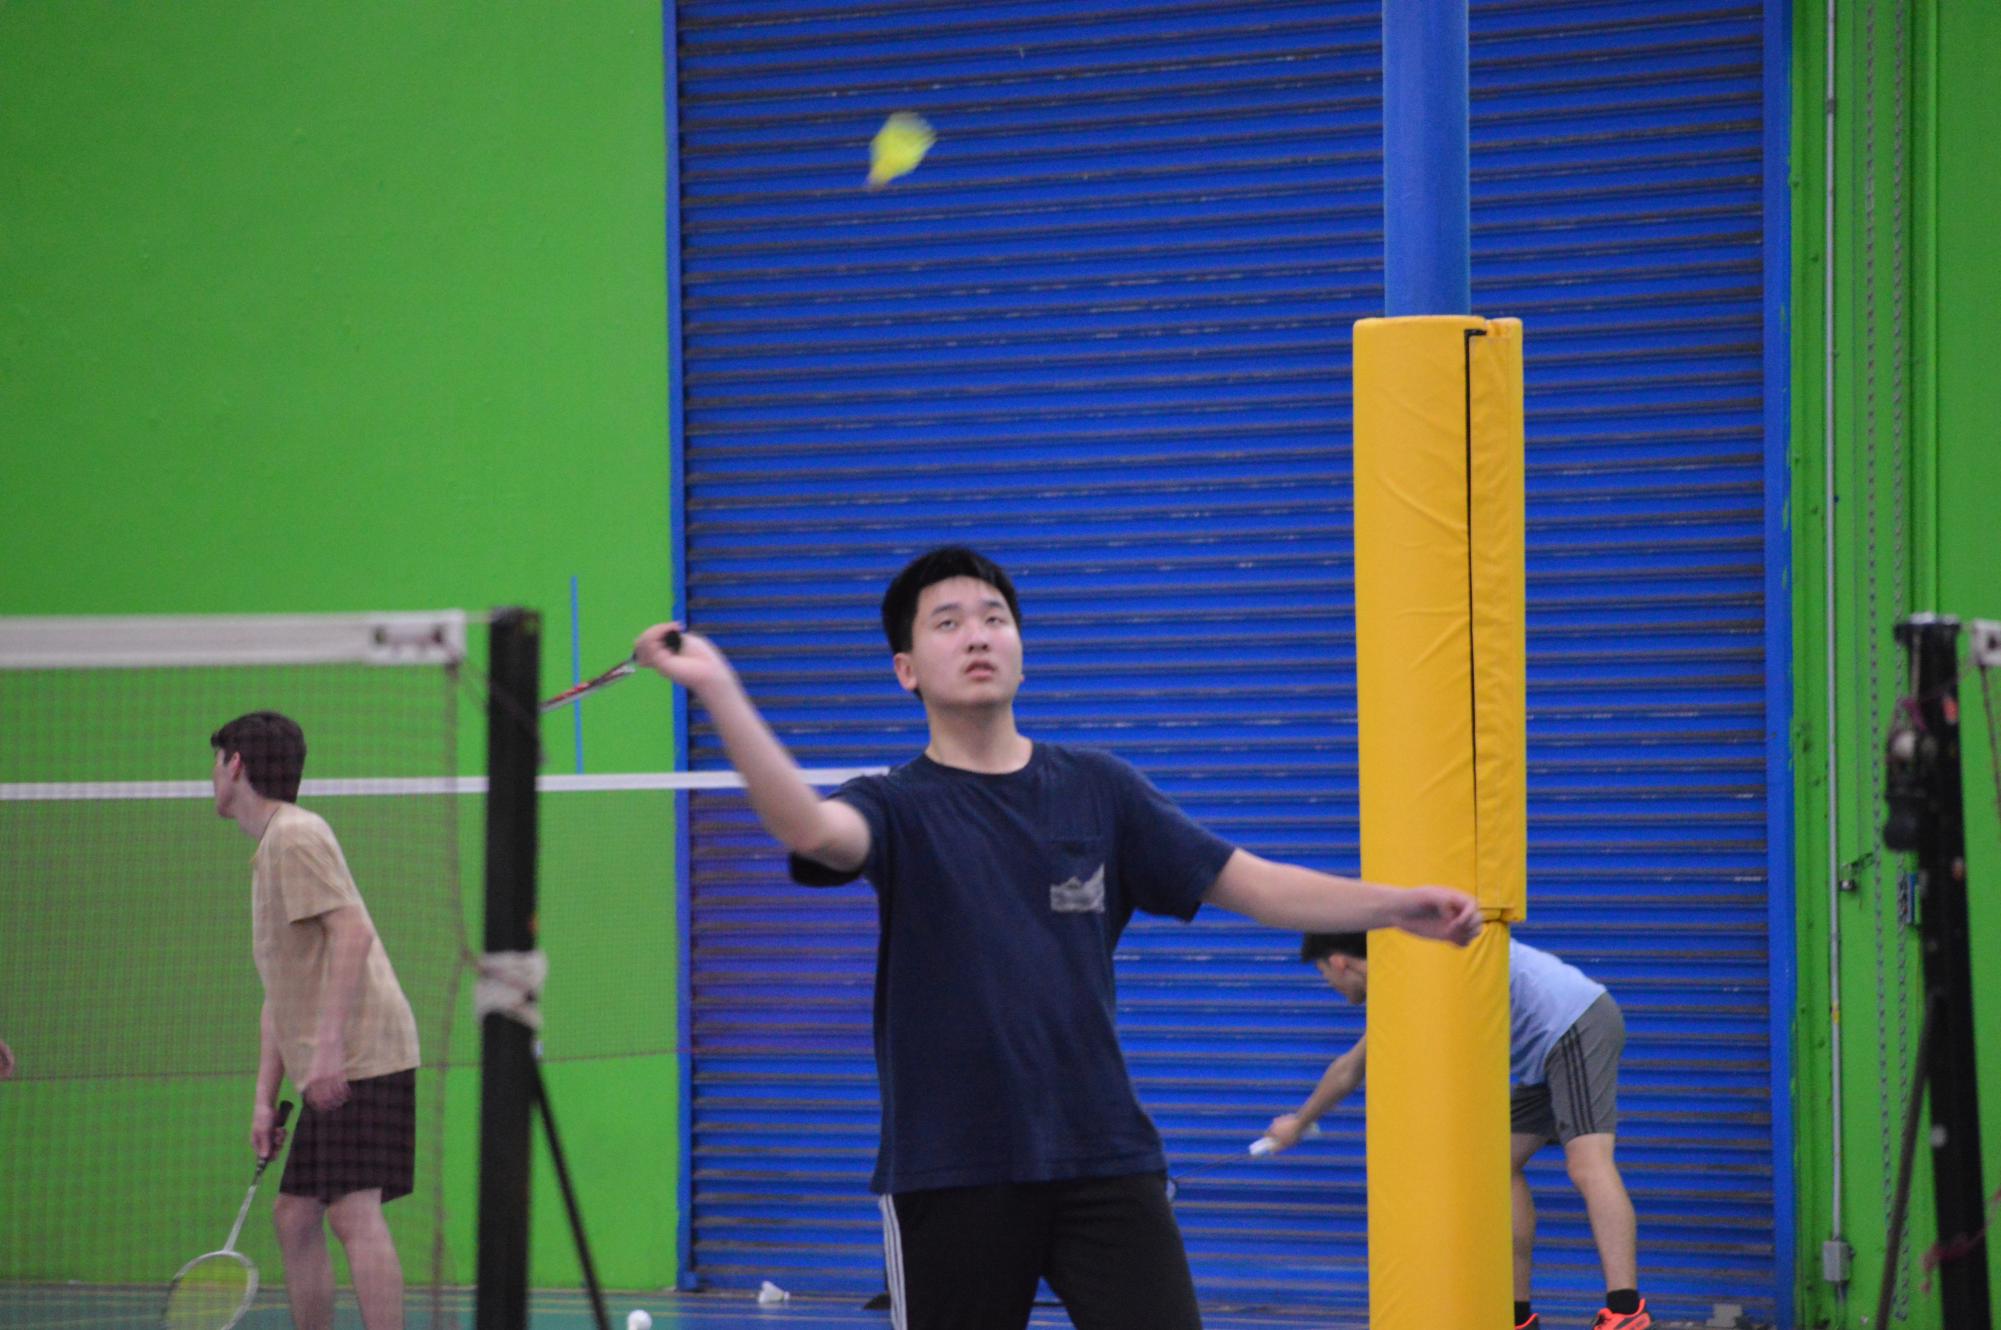 Badminton players warm up, taking some shots during practice on Thursday, Feb. 22.
